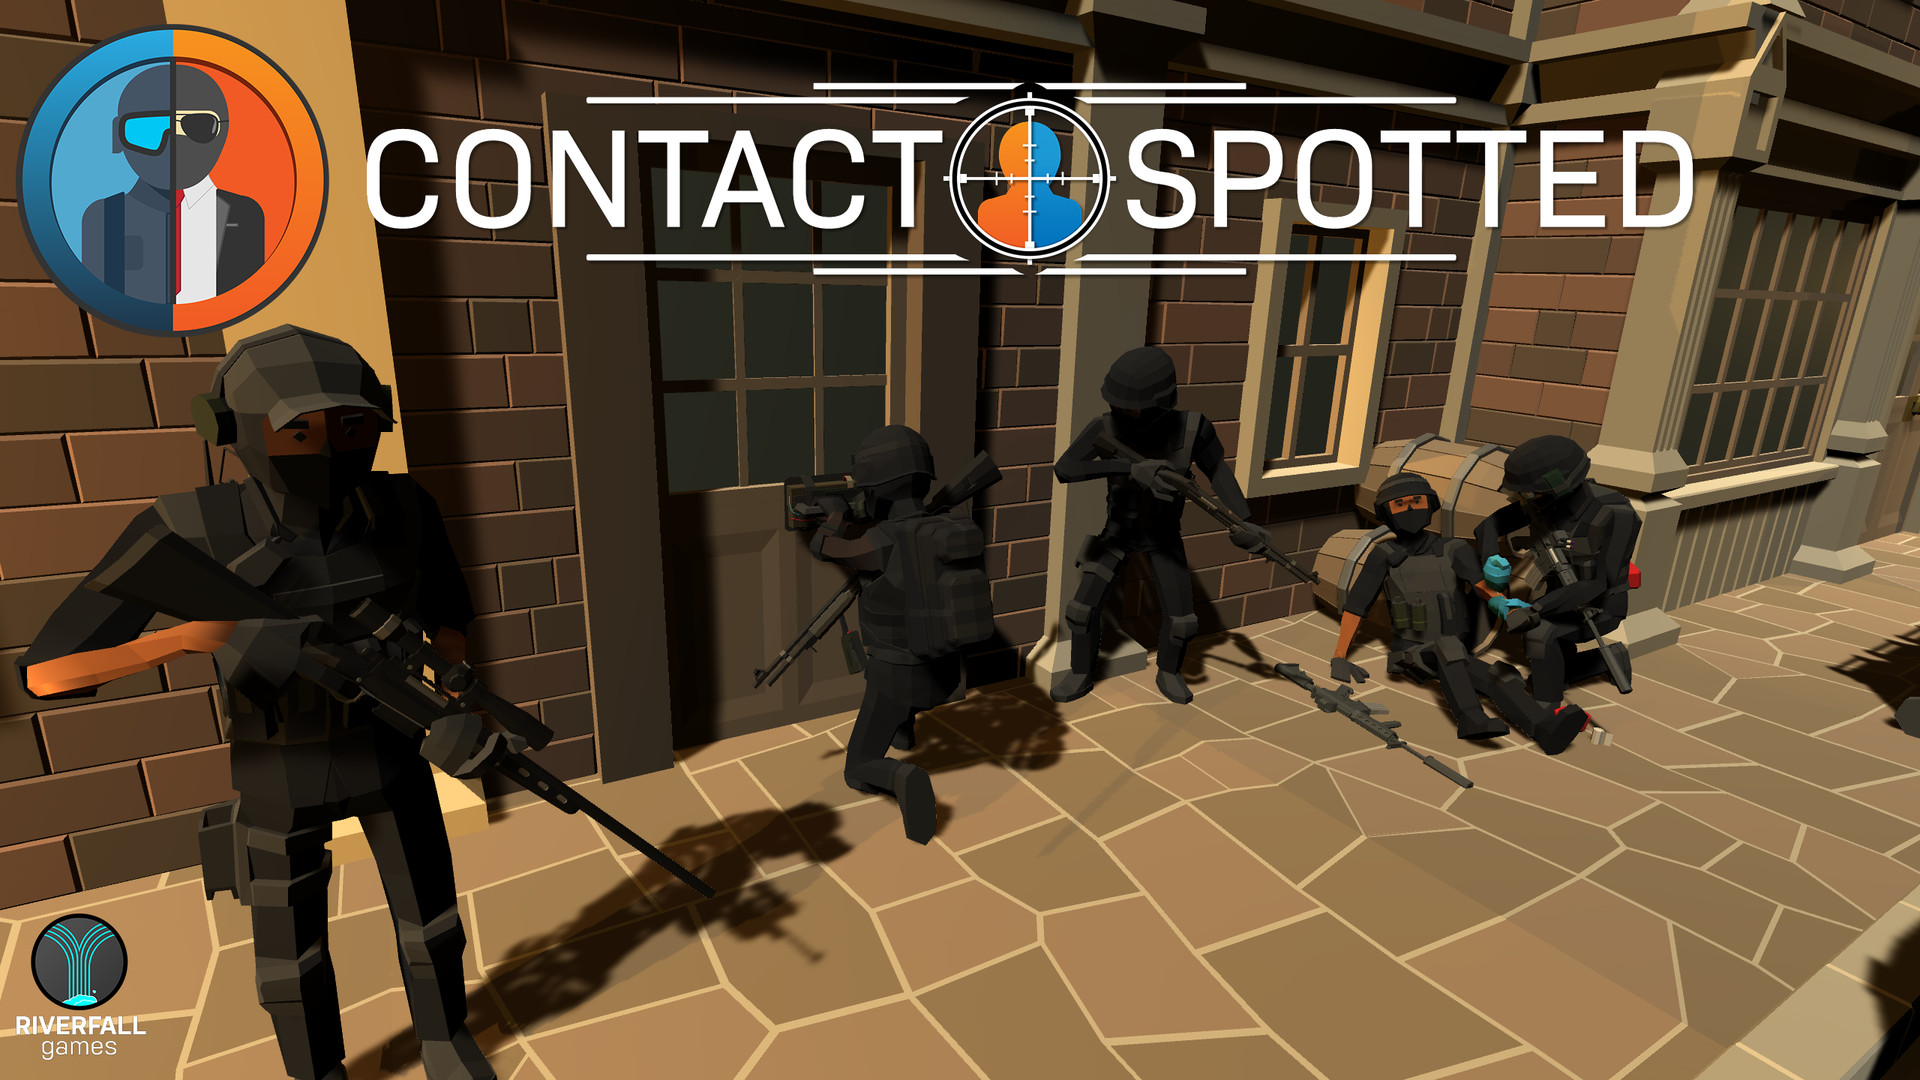 Contact Spotted Featured Screenshot #1